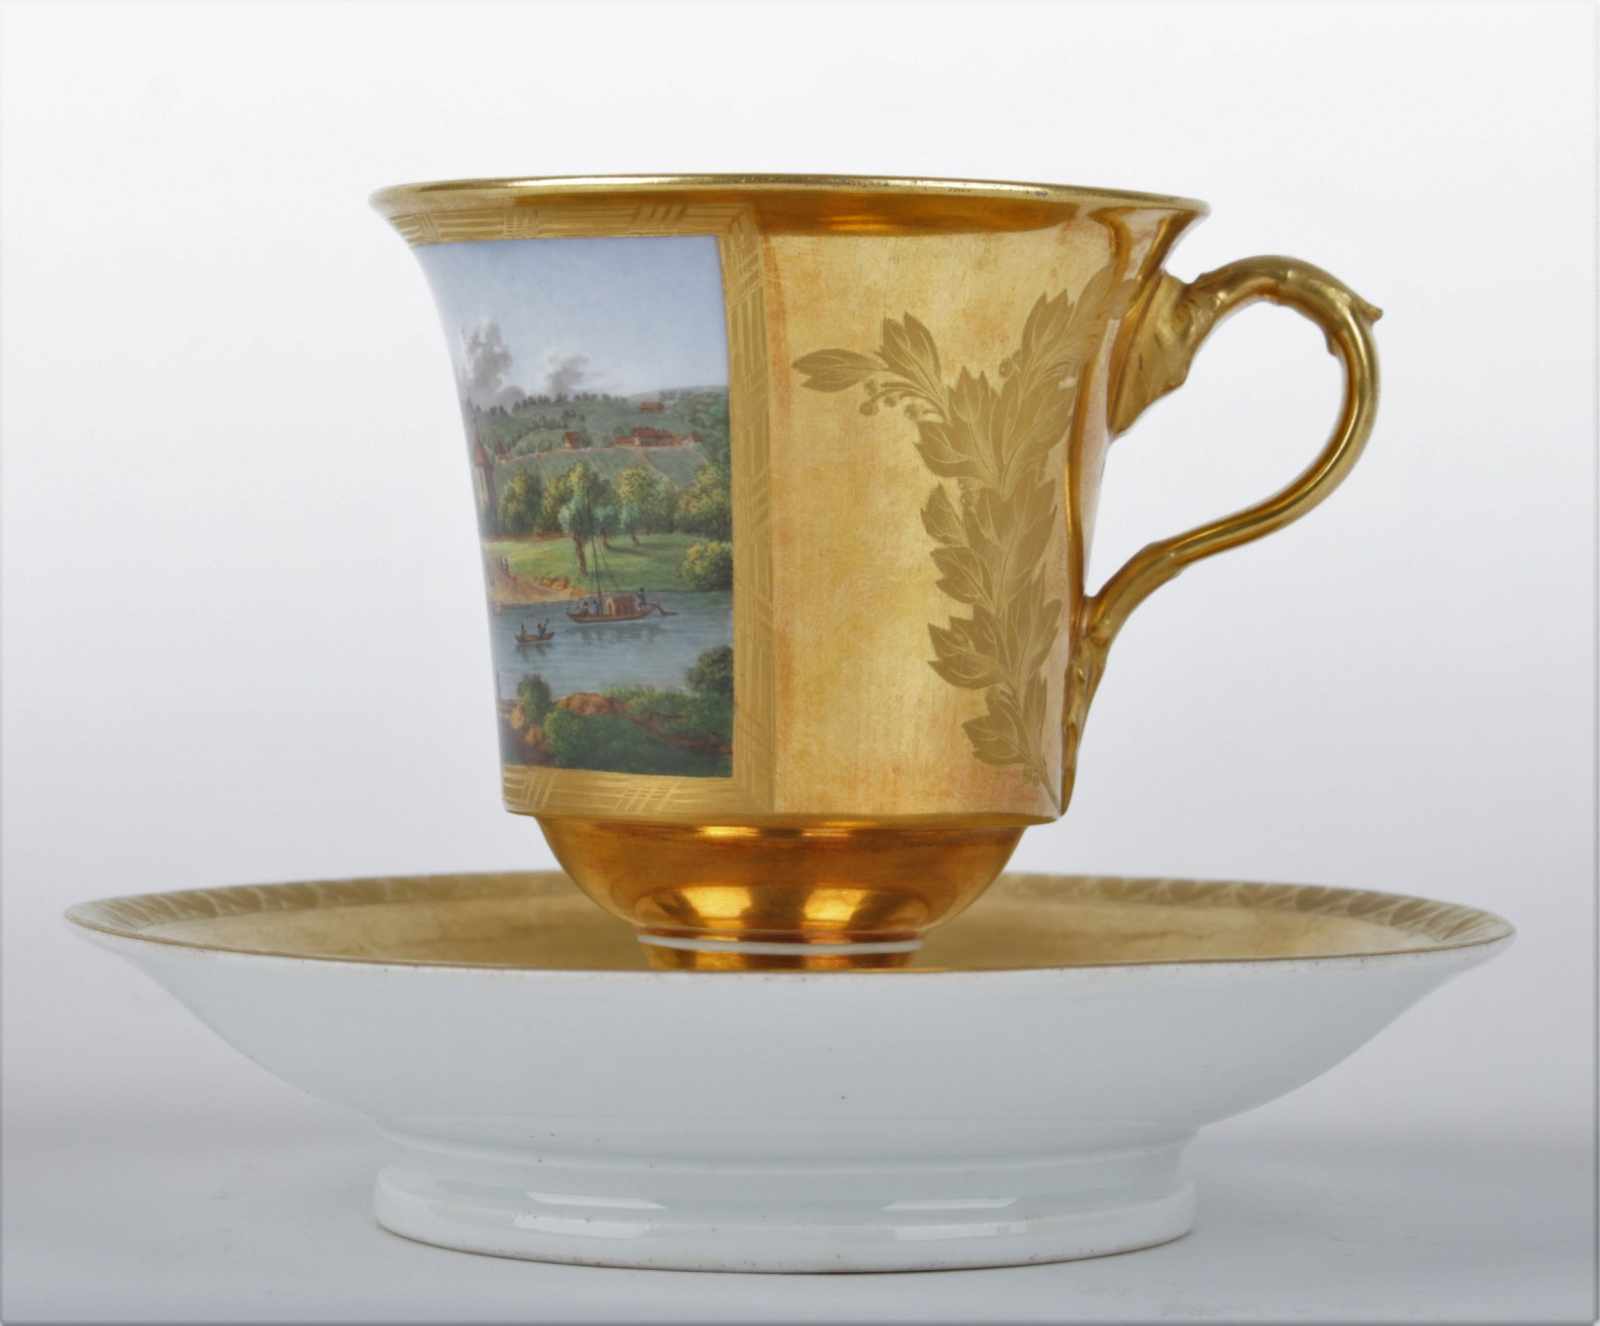 Rare Empire Meissen cup with a saucer Germany, Meissen, around 1820, rare empire cup with a - Image 6 of 11